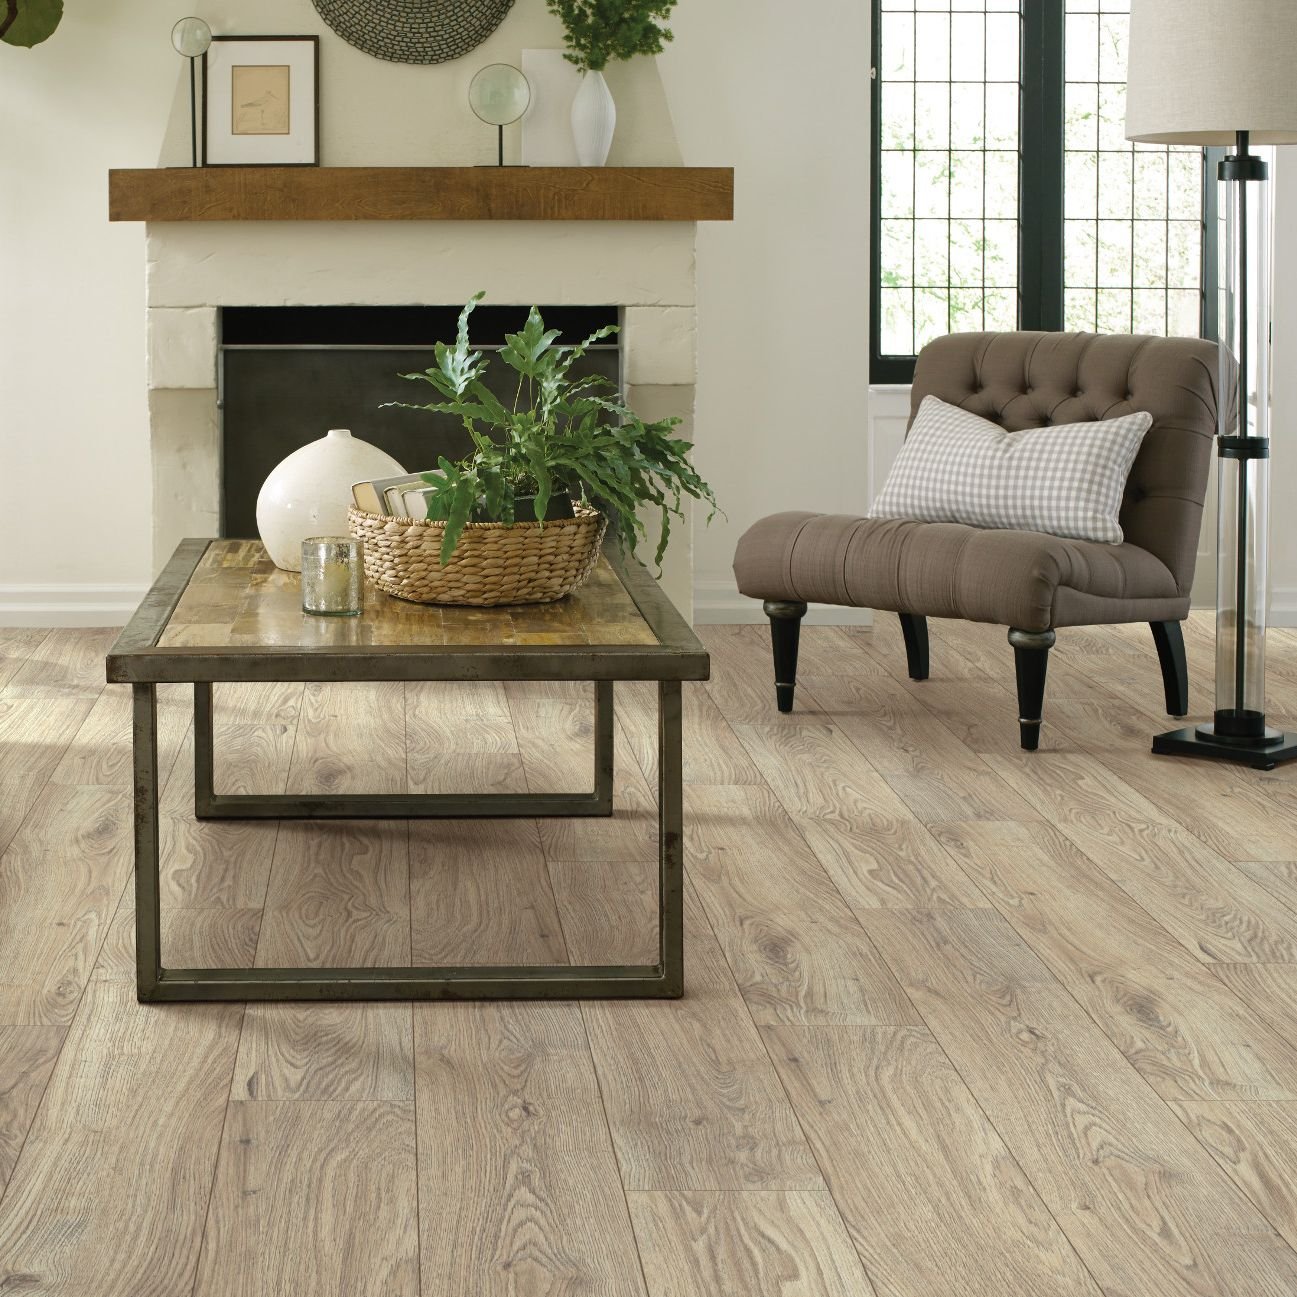 Laminate Flooring Articles, Tips, Tricks & Solutions Provided By Carpet City Inc